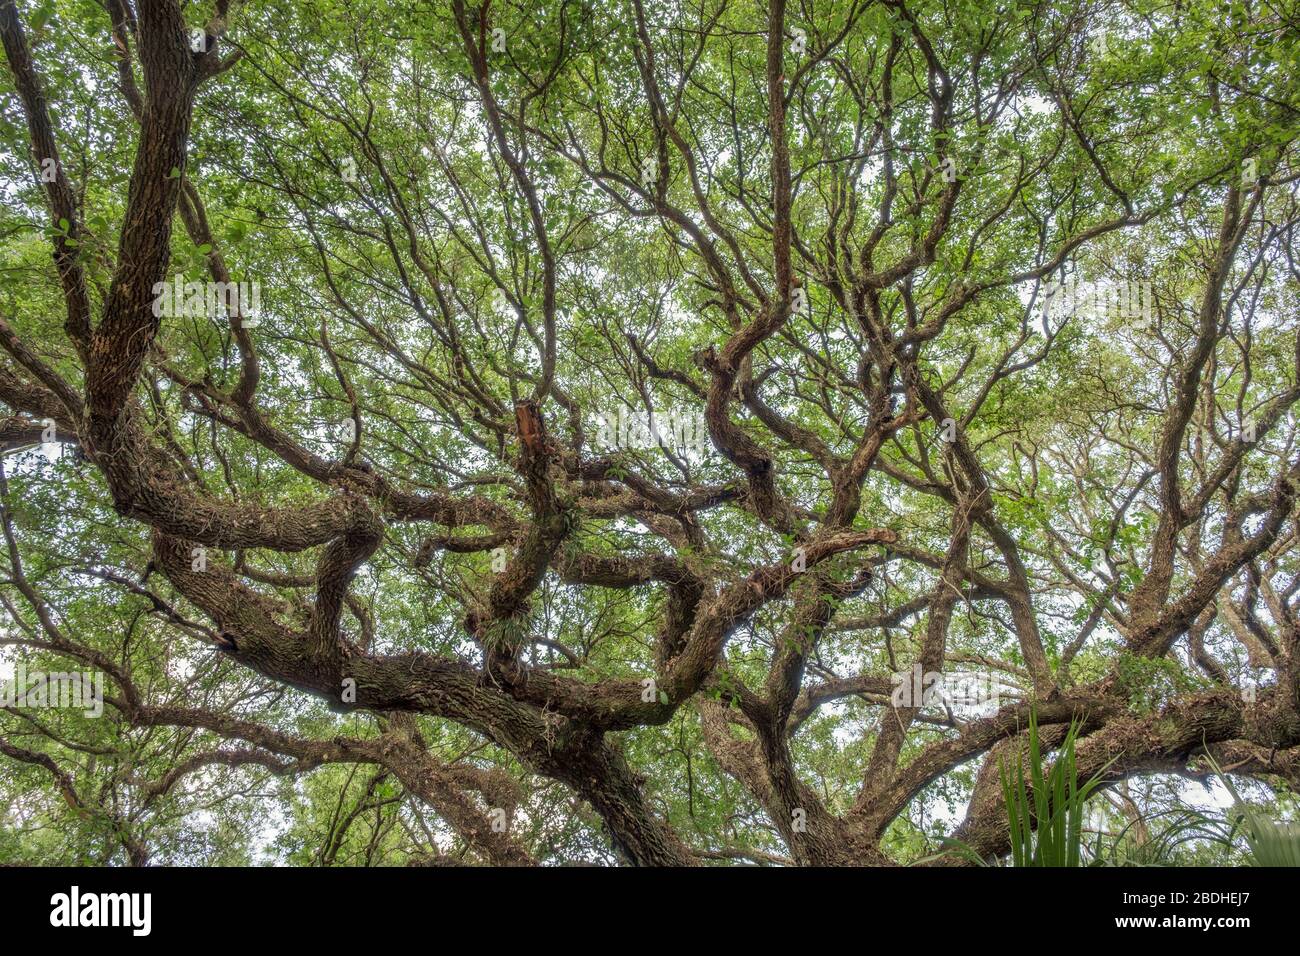 Southern Live Oak tree branches. Looking up into tree. Halpata Tastanaki Preserve. Public land in Dunnellon, Florida. Marion County. Stock Photo